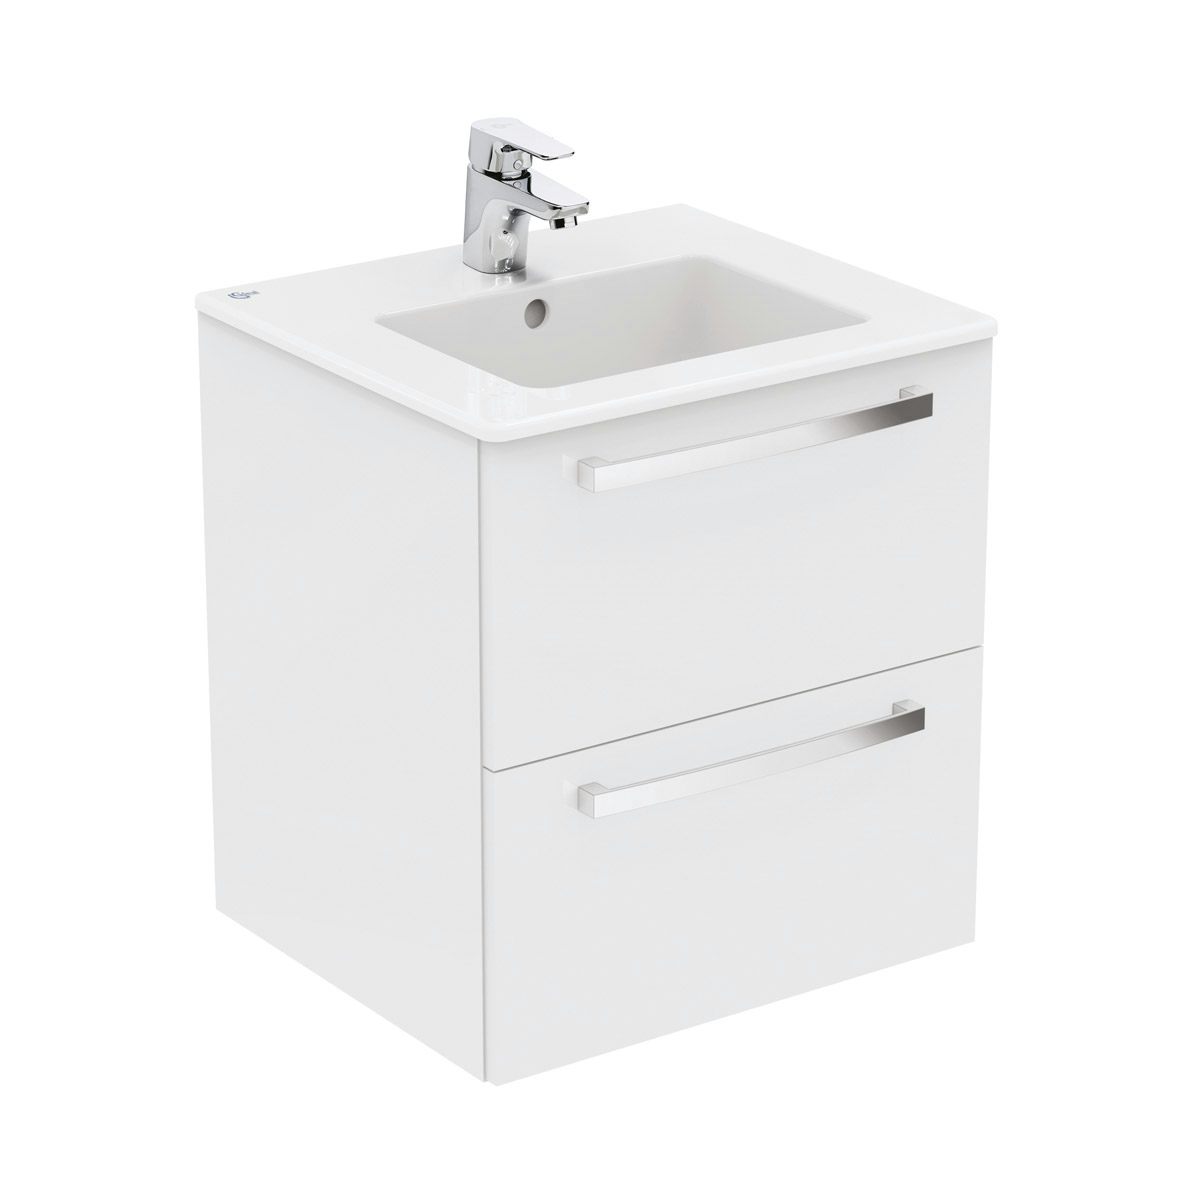 Omile 800mm Wall Hung White Ceramic Basin Sink Vanity Unit Nes Home